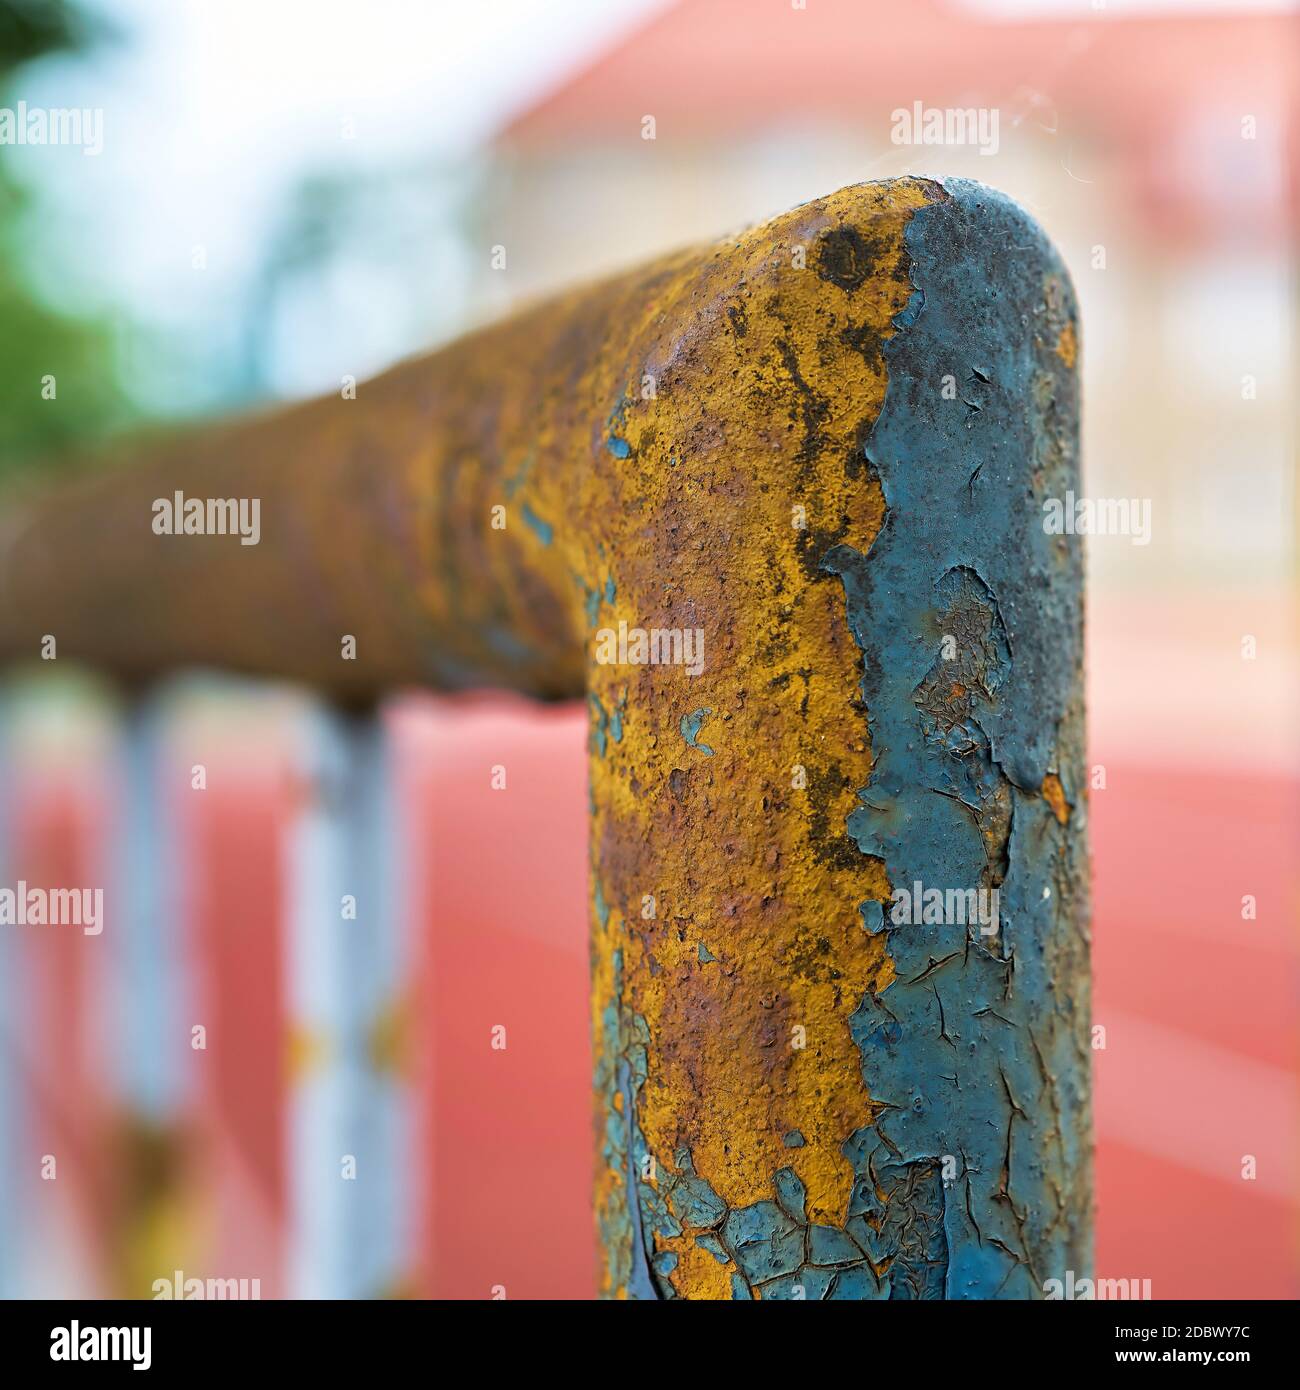 paint flaking off an old dilapidated rusty fence Stock Photo